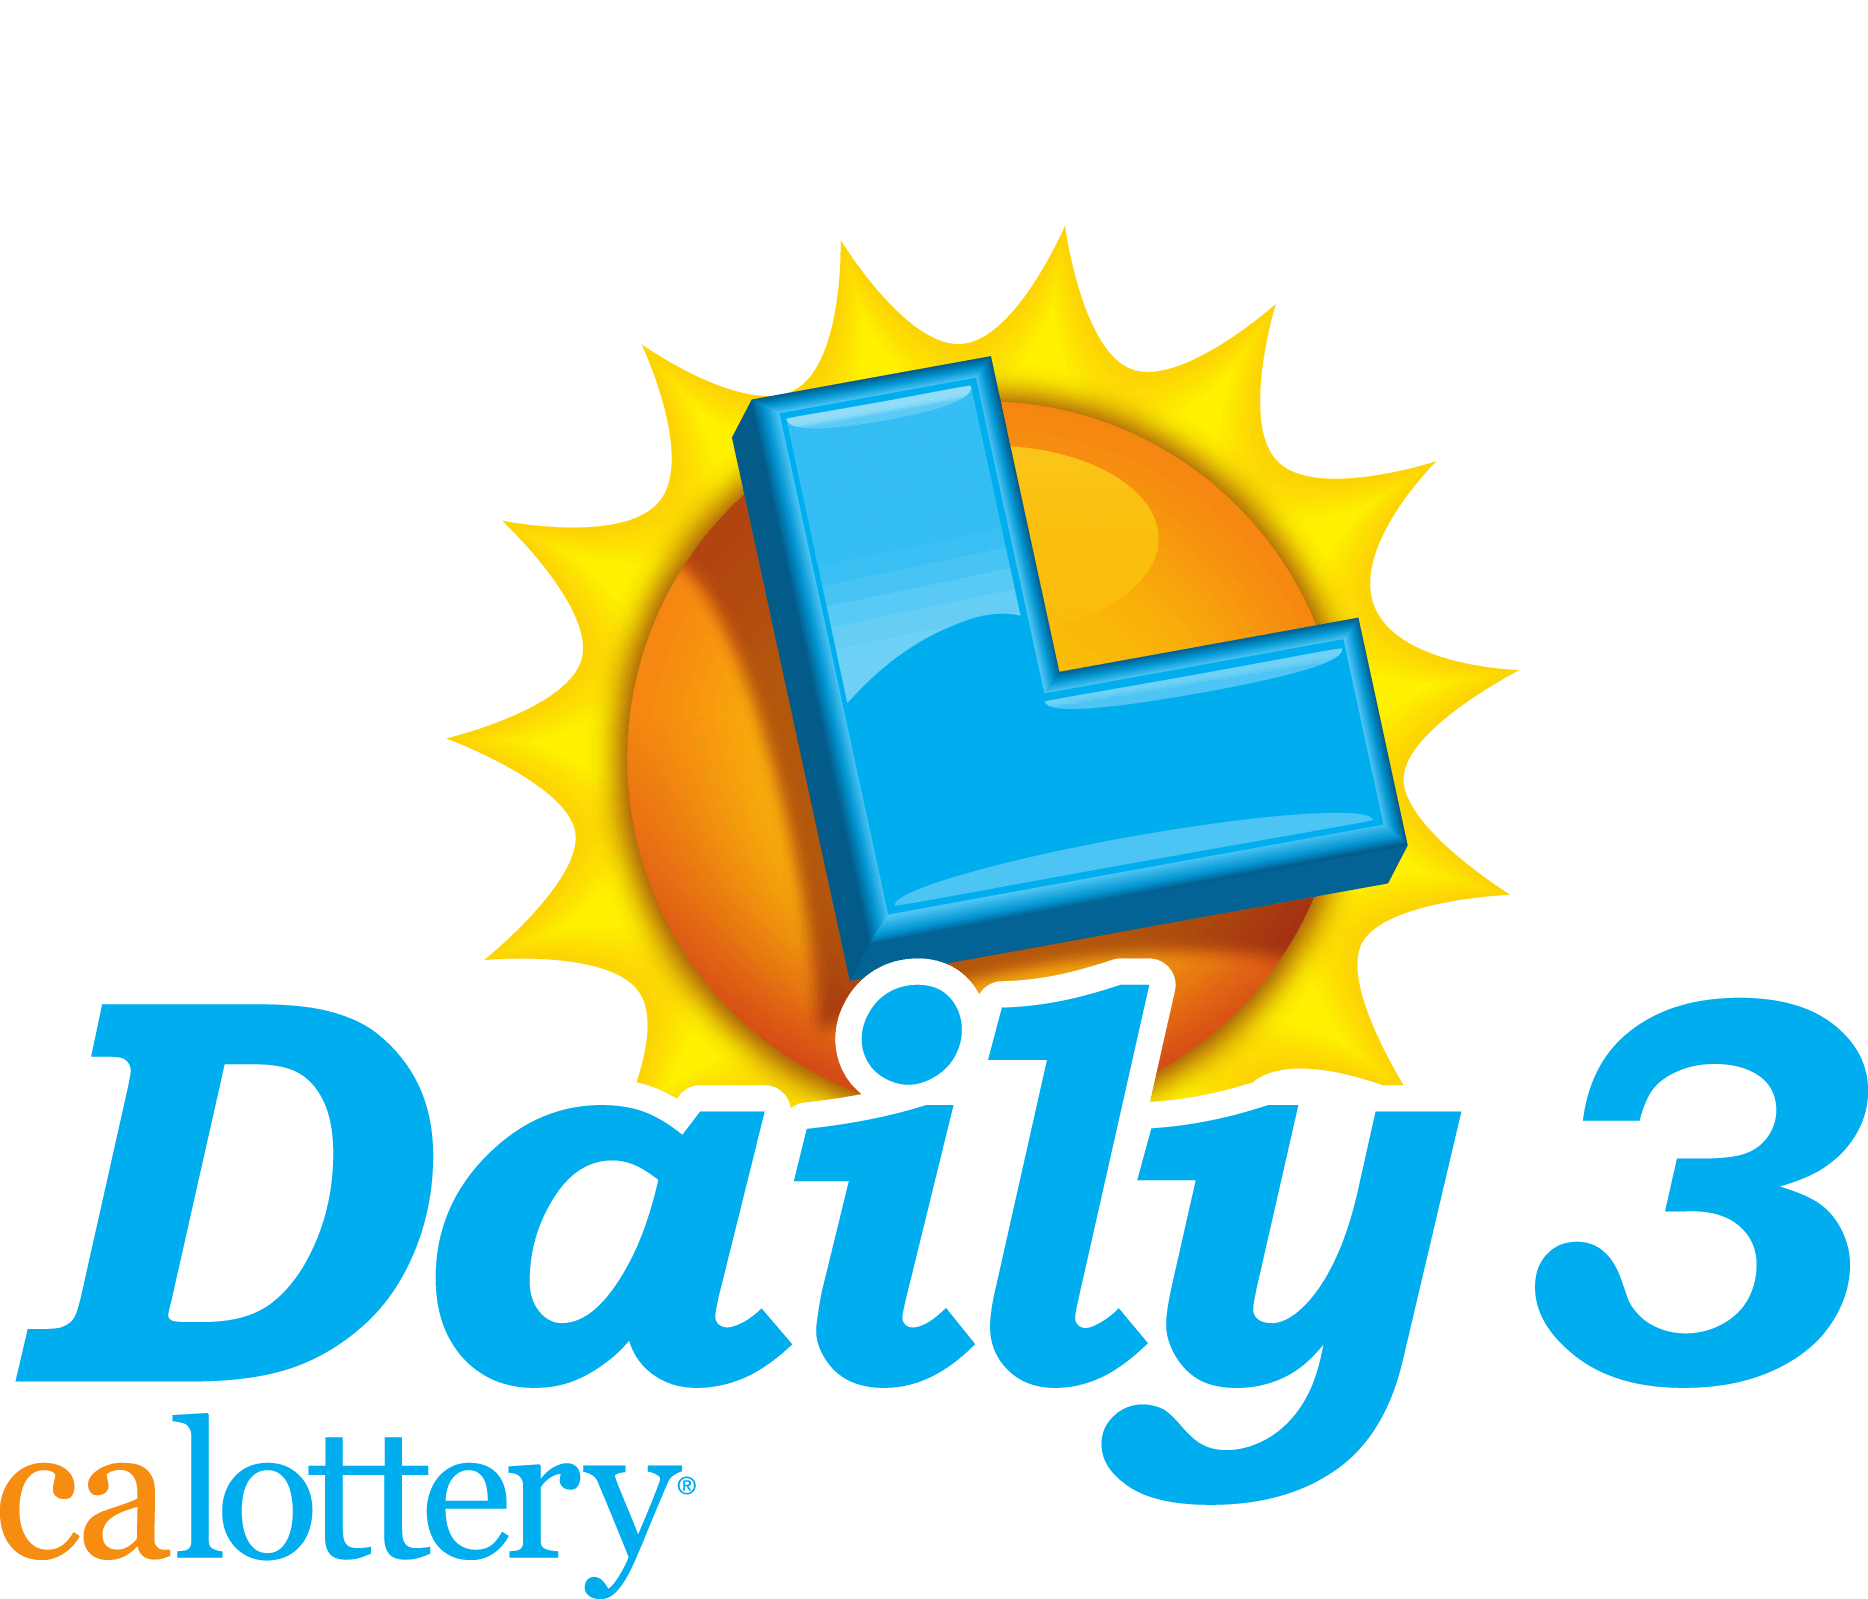 lotto midday numbers for today